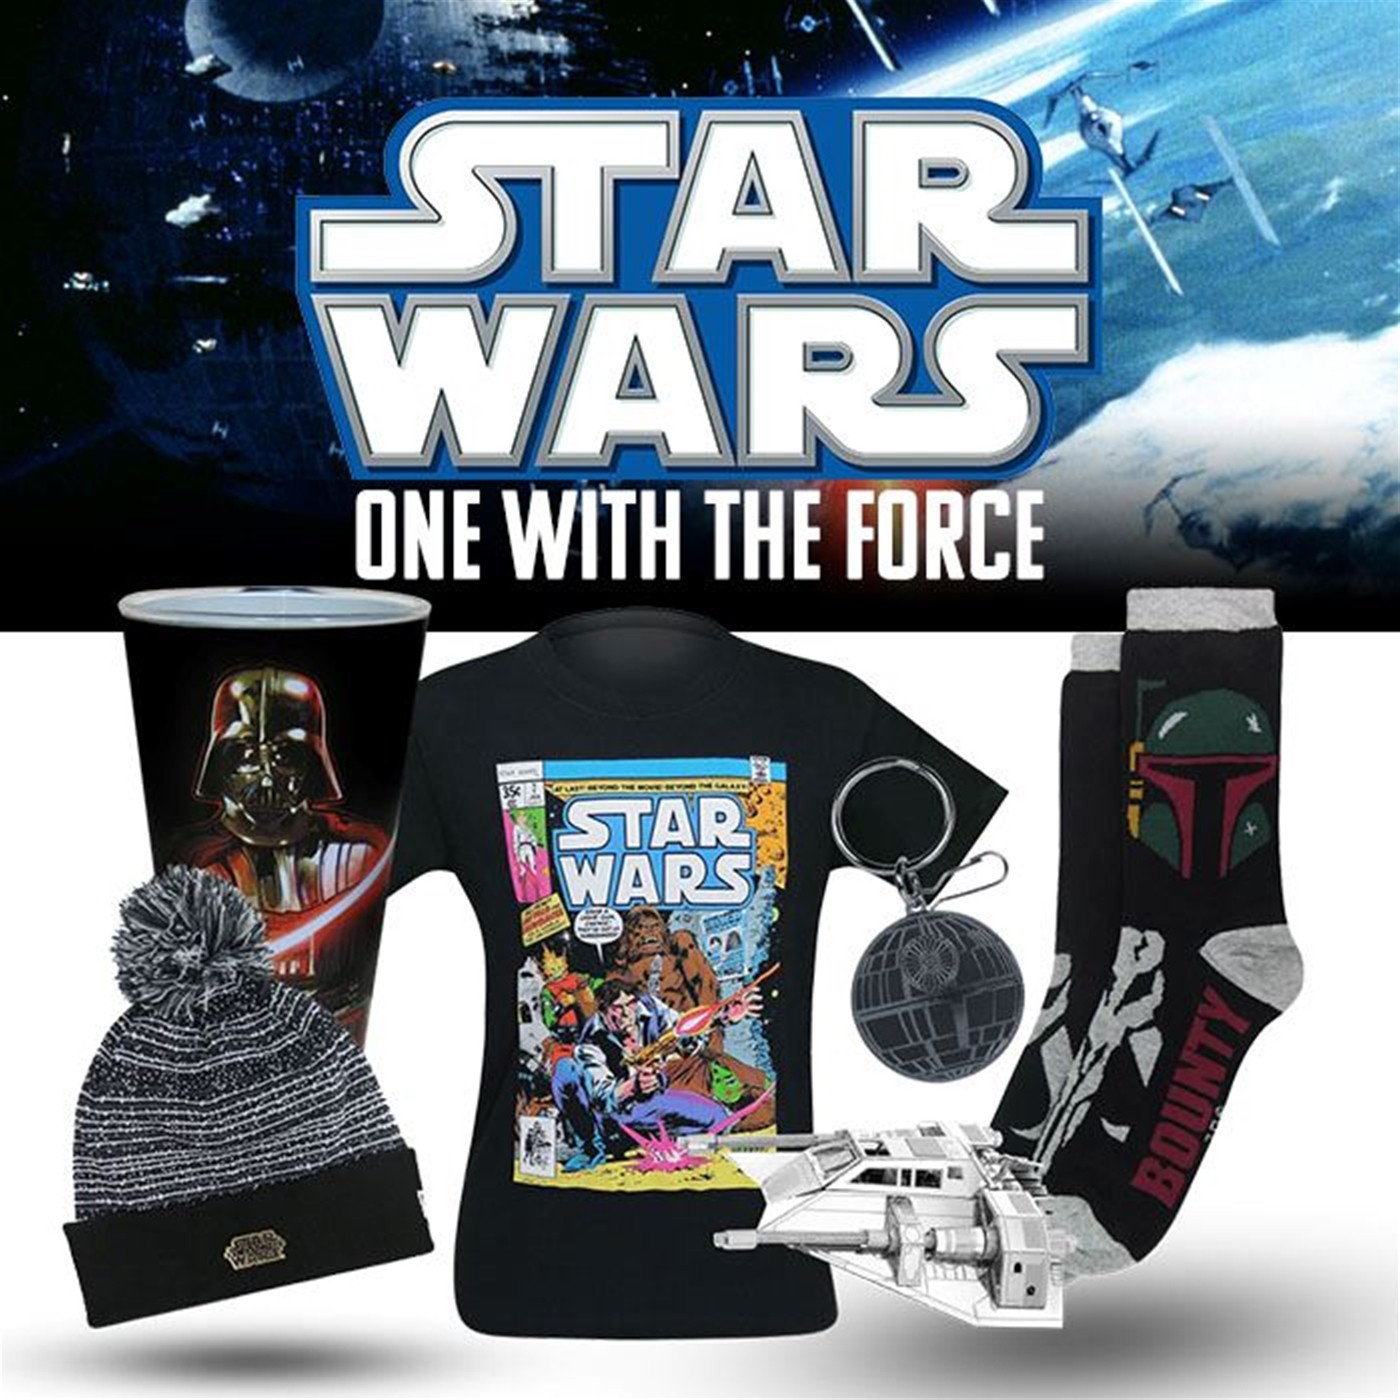 Star Wars One with the Force Edition